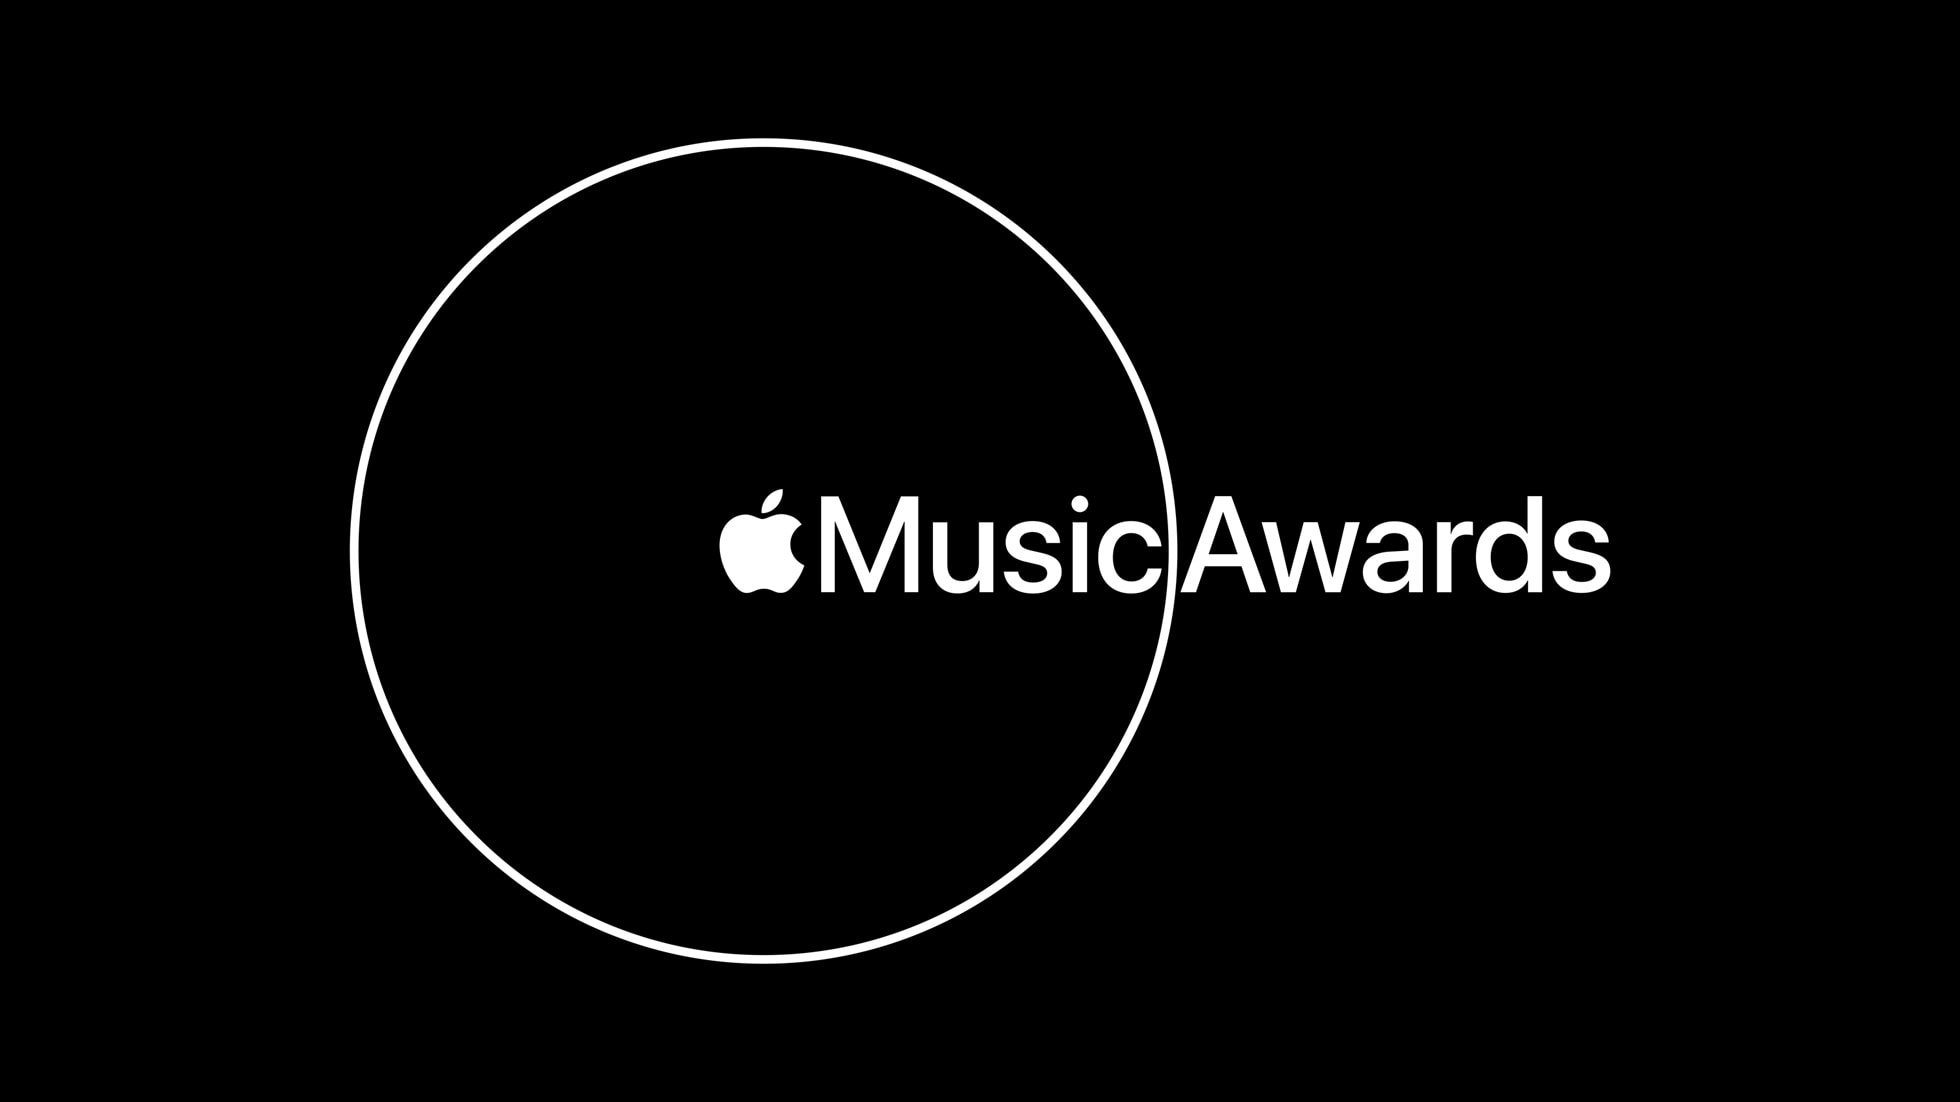 Apple unveil the best artists of 2021 with the third annual Apple Music Awards